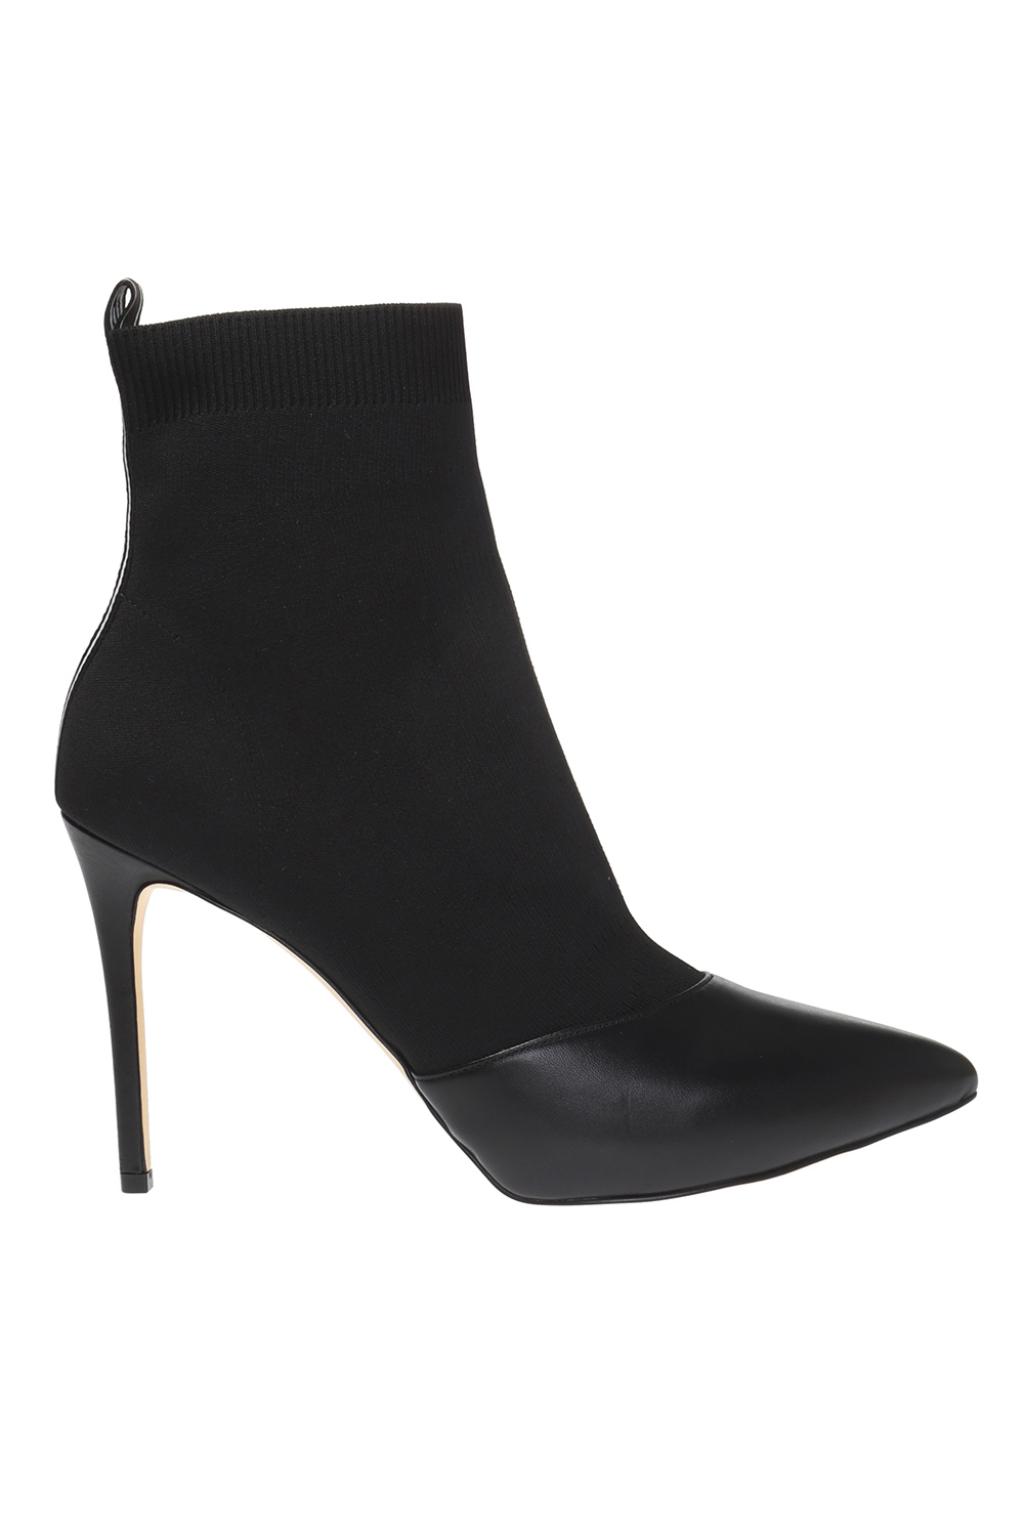 Michael Michael Kors 'Vicky' ankle boots with sock | Women's Shoes | Vitkac